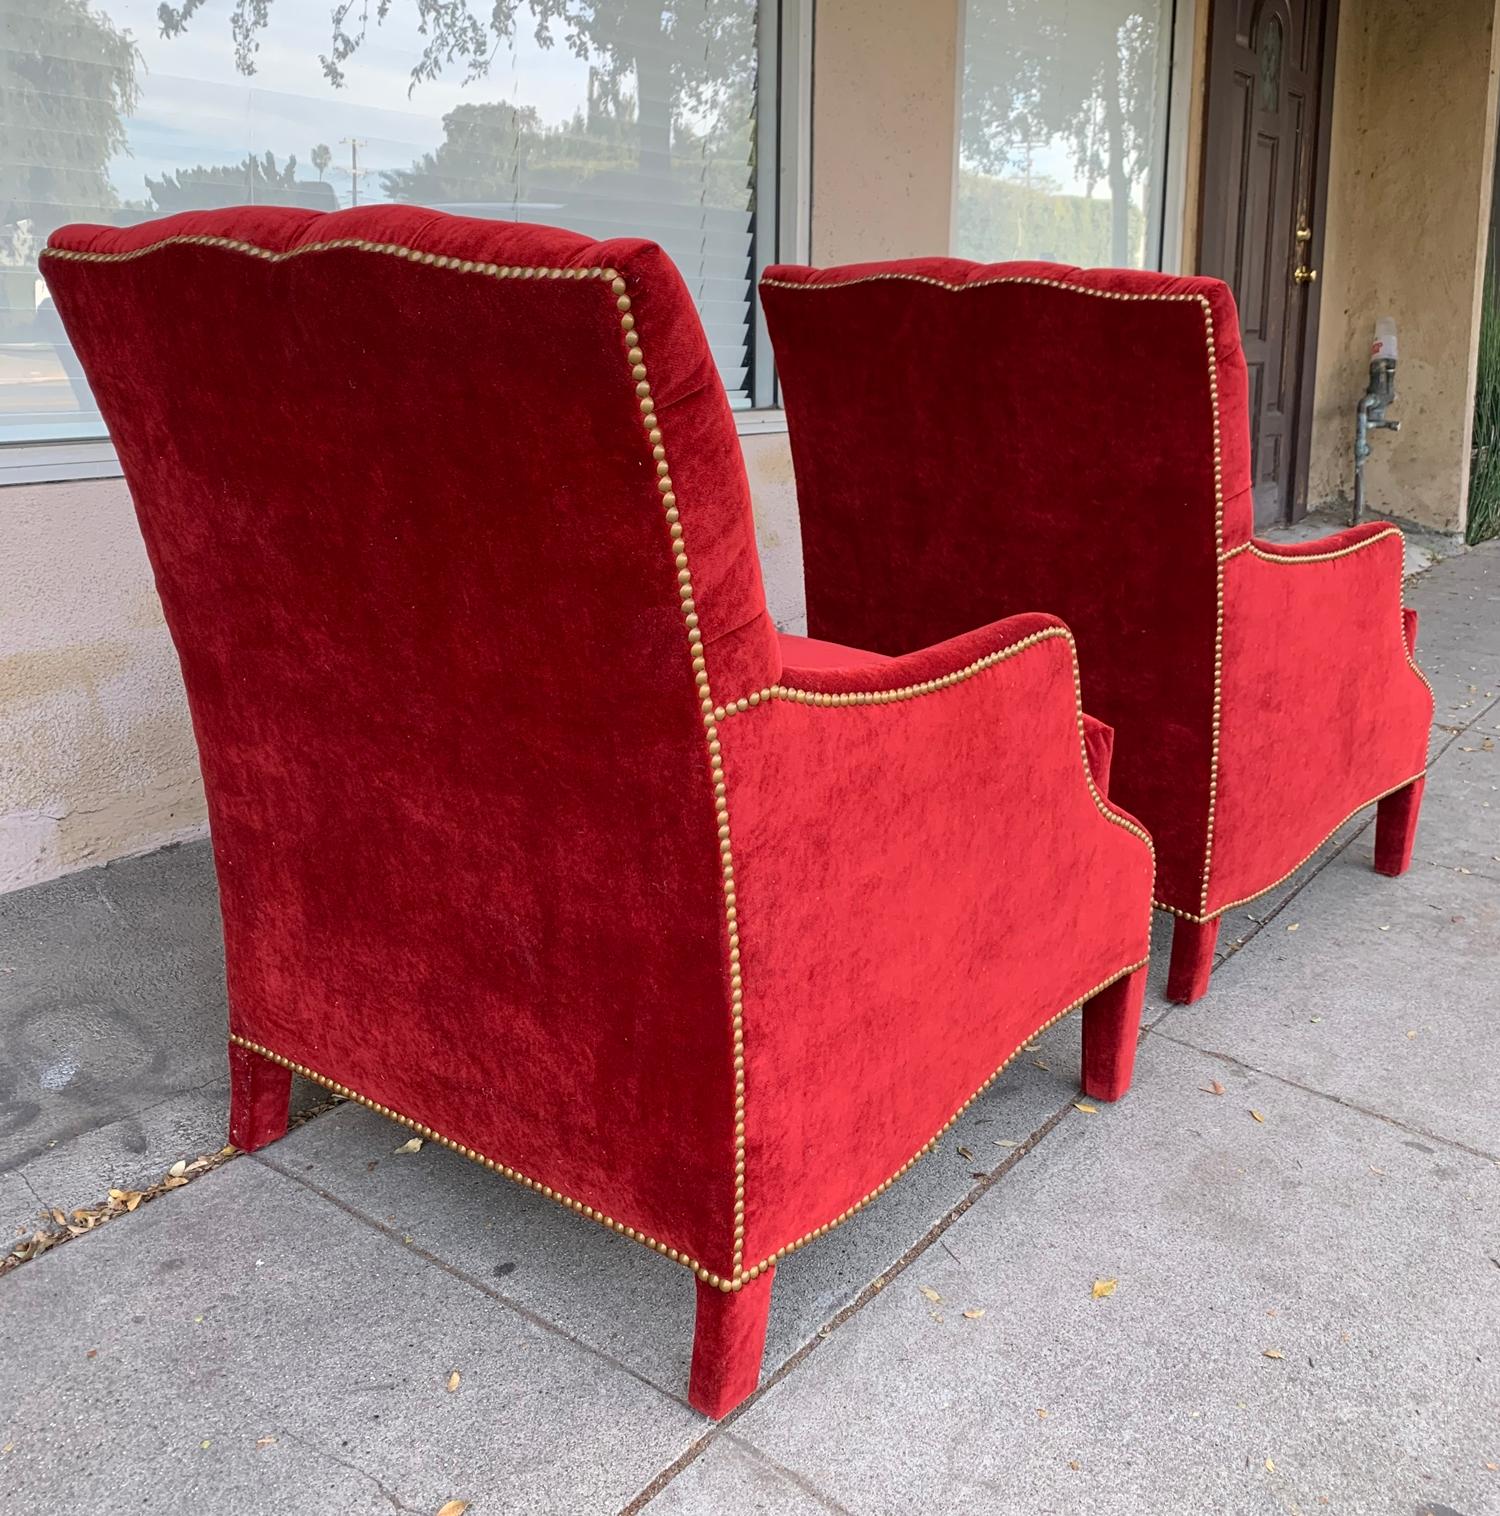 Beautiful pair of English Style armchairs designed and manufactured in the USA, the chairs have tufted backs and nail-head trimming, upholstered in red velvet fabric, newly upholstered and ready to be displayed.
The cushion is